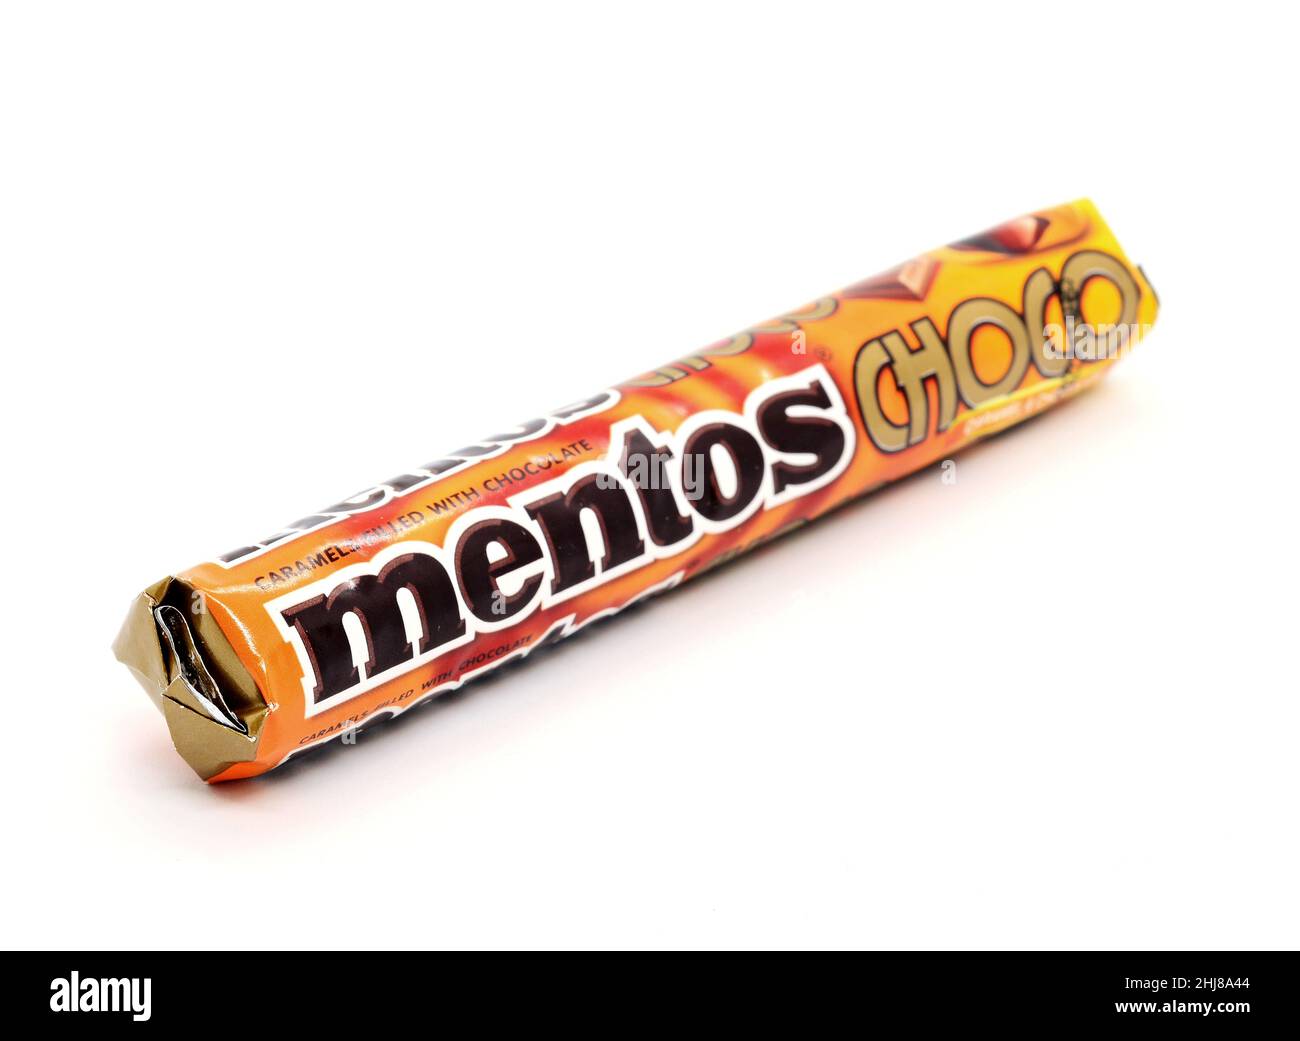 PRAGUE, CZECH REPUBLIC - DECEMBER 15, 2021: Chewy Mentos stick candy with chocolate and caramel flavor on white background. Stock Photo